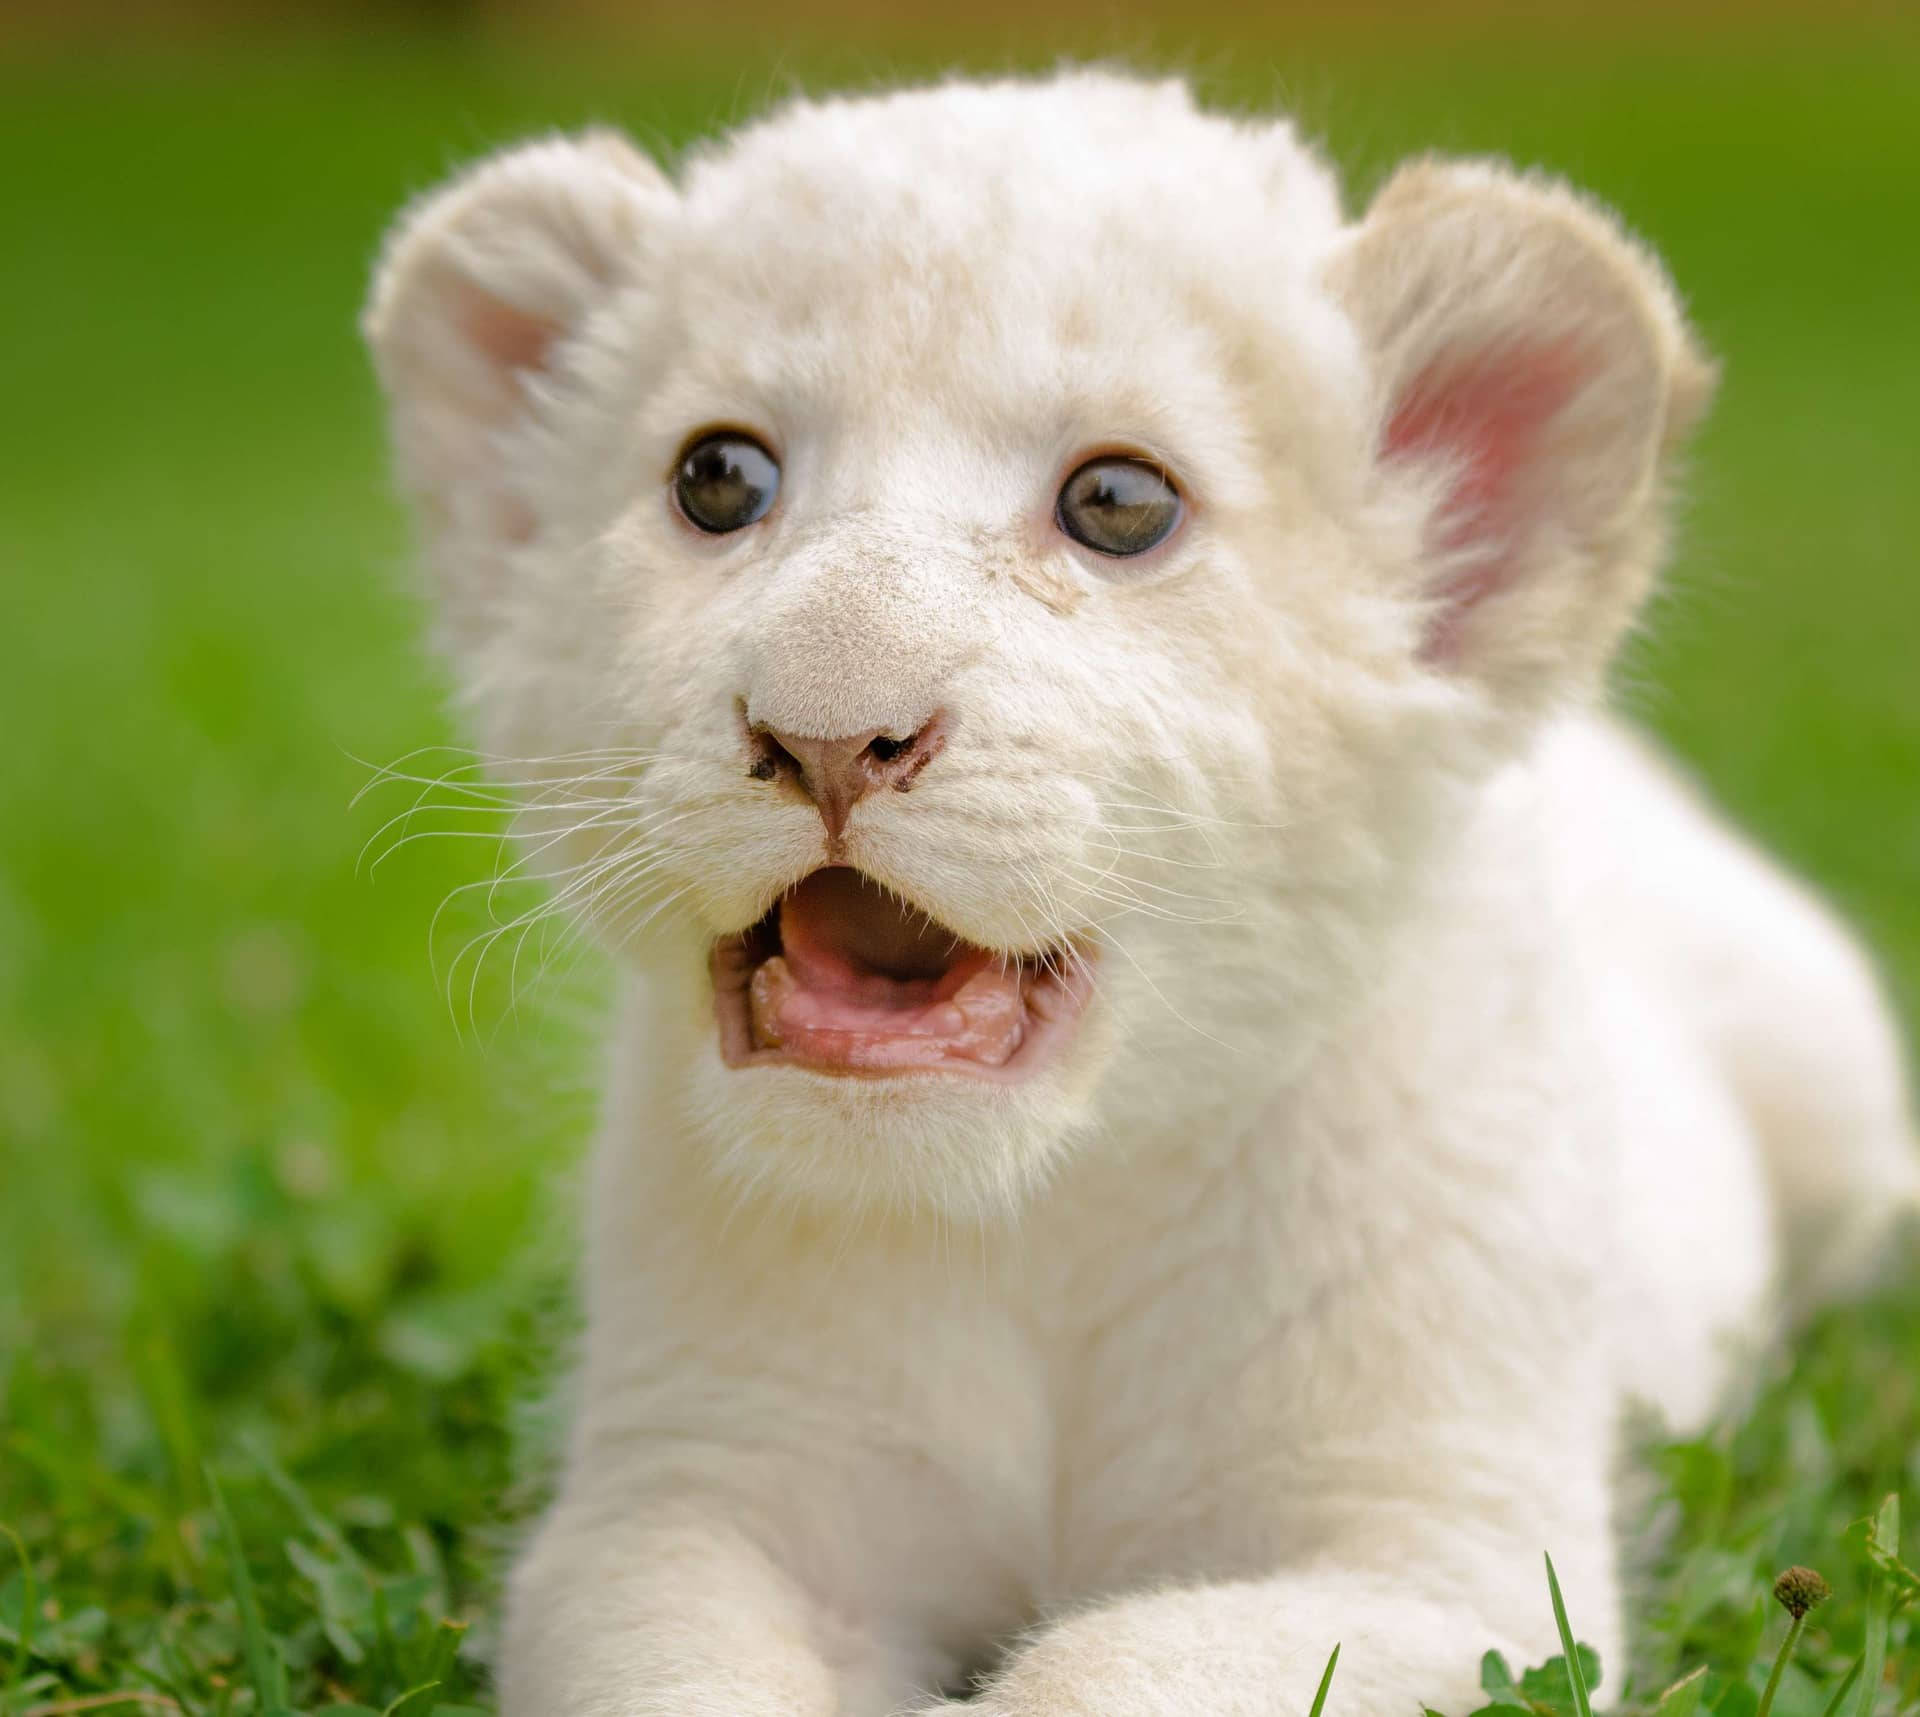 Astonished Baby White Lion In A Mesmerizing Close-up Shot